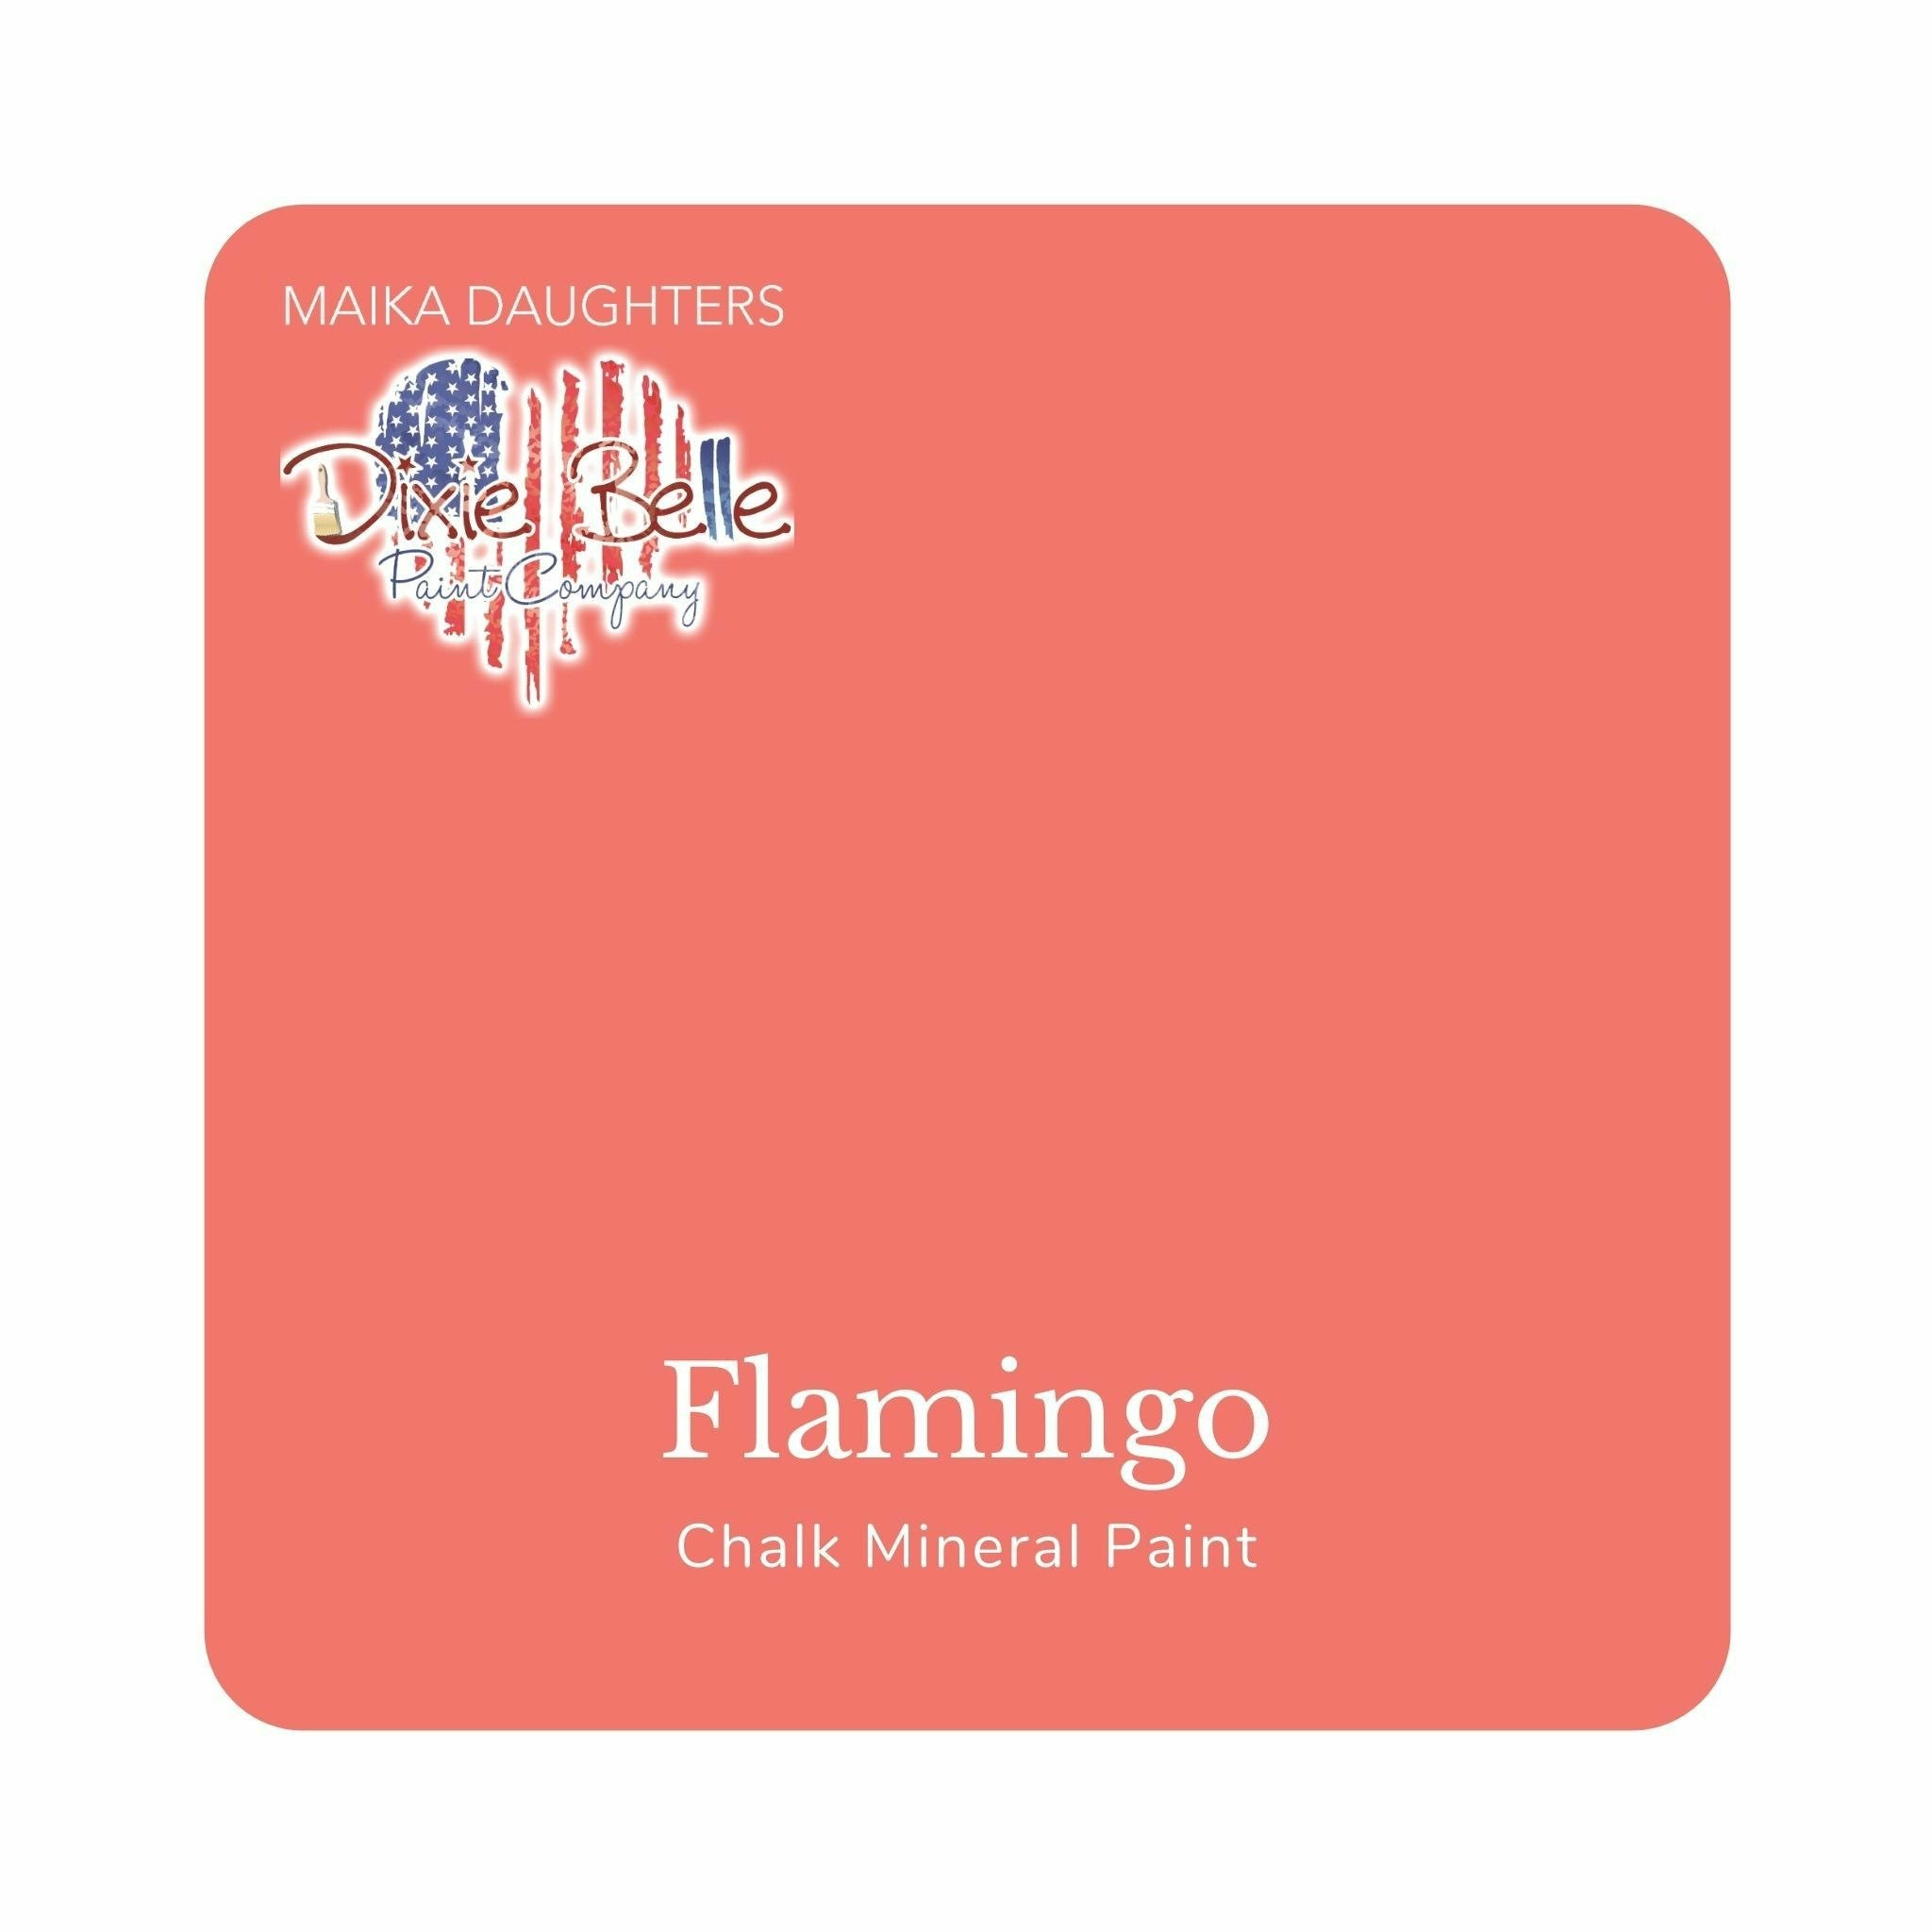 A square swatch card of Dixie Belle Paint Company’s Flamingo Chalk Mineral Paint is against a white background. This color is bright coral with a pink undertone.